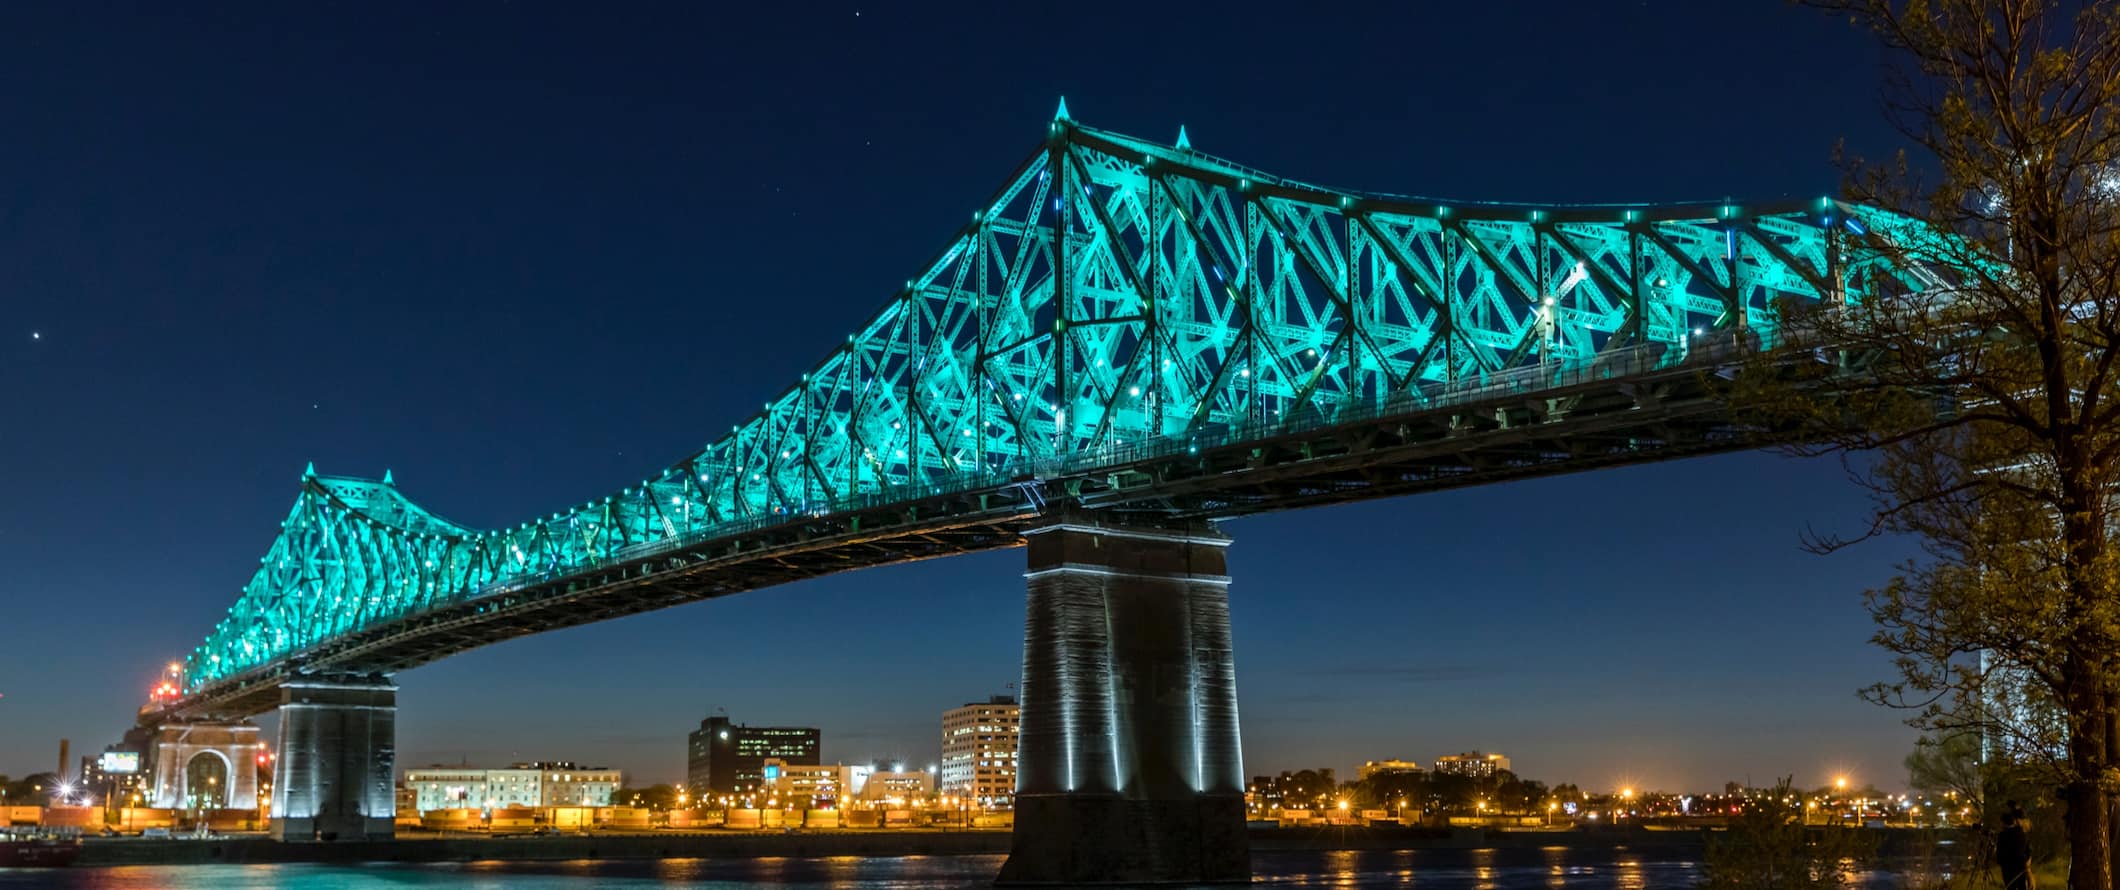 The iconic Cartier bridge in Montreal, Canada lit up at night